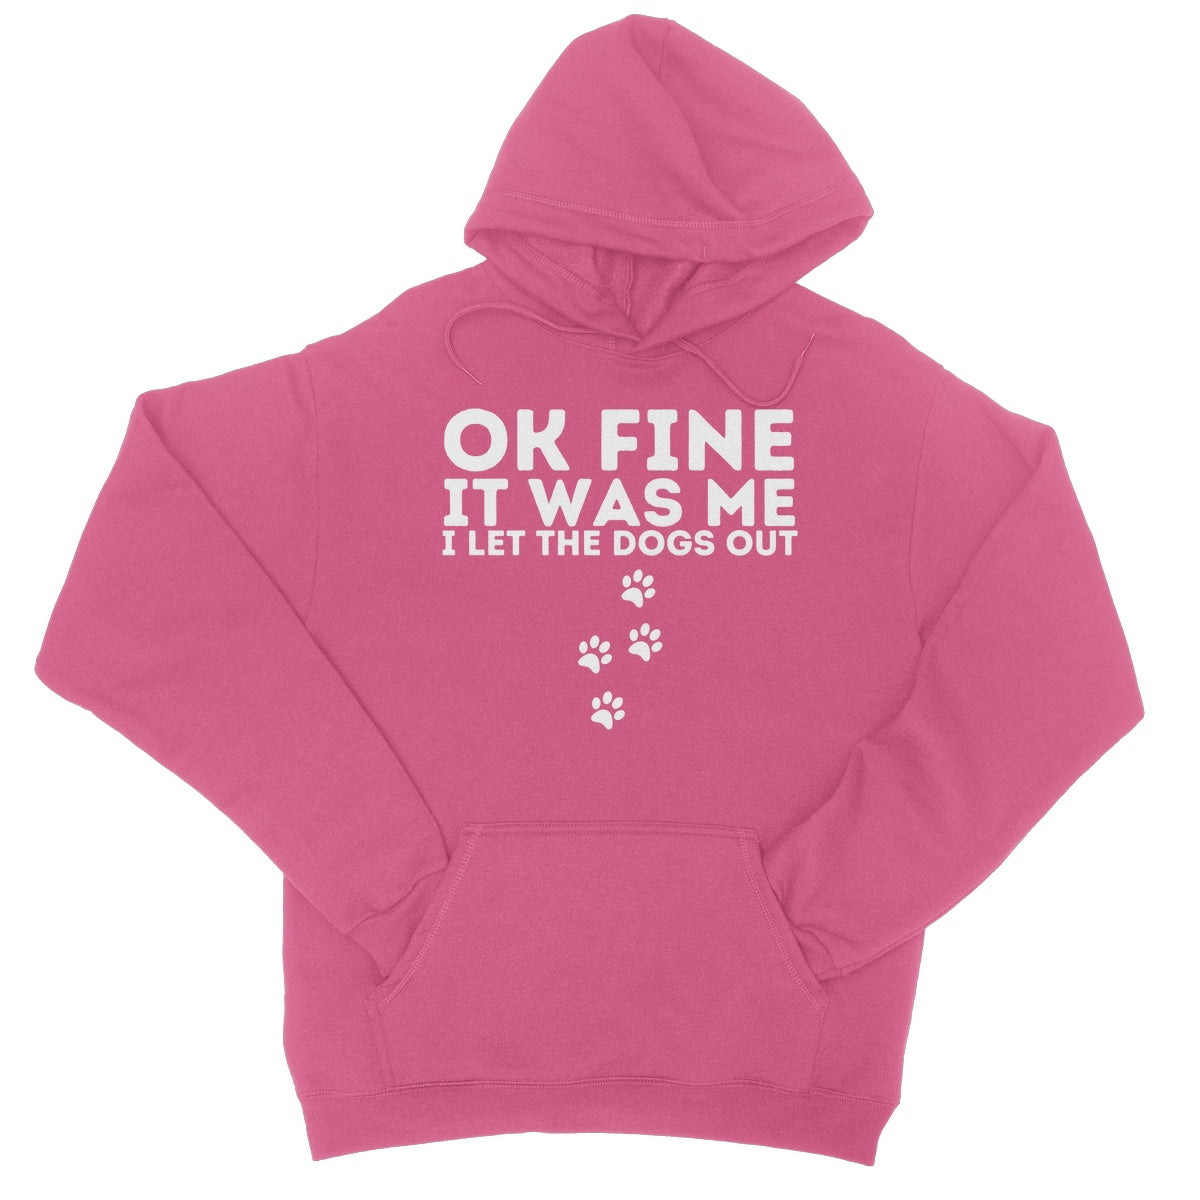 I let the dogs out hoodie pink